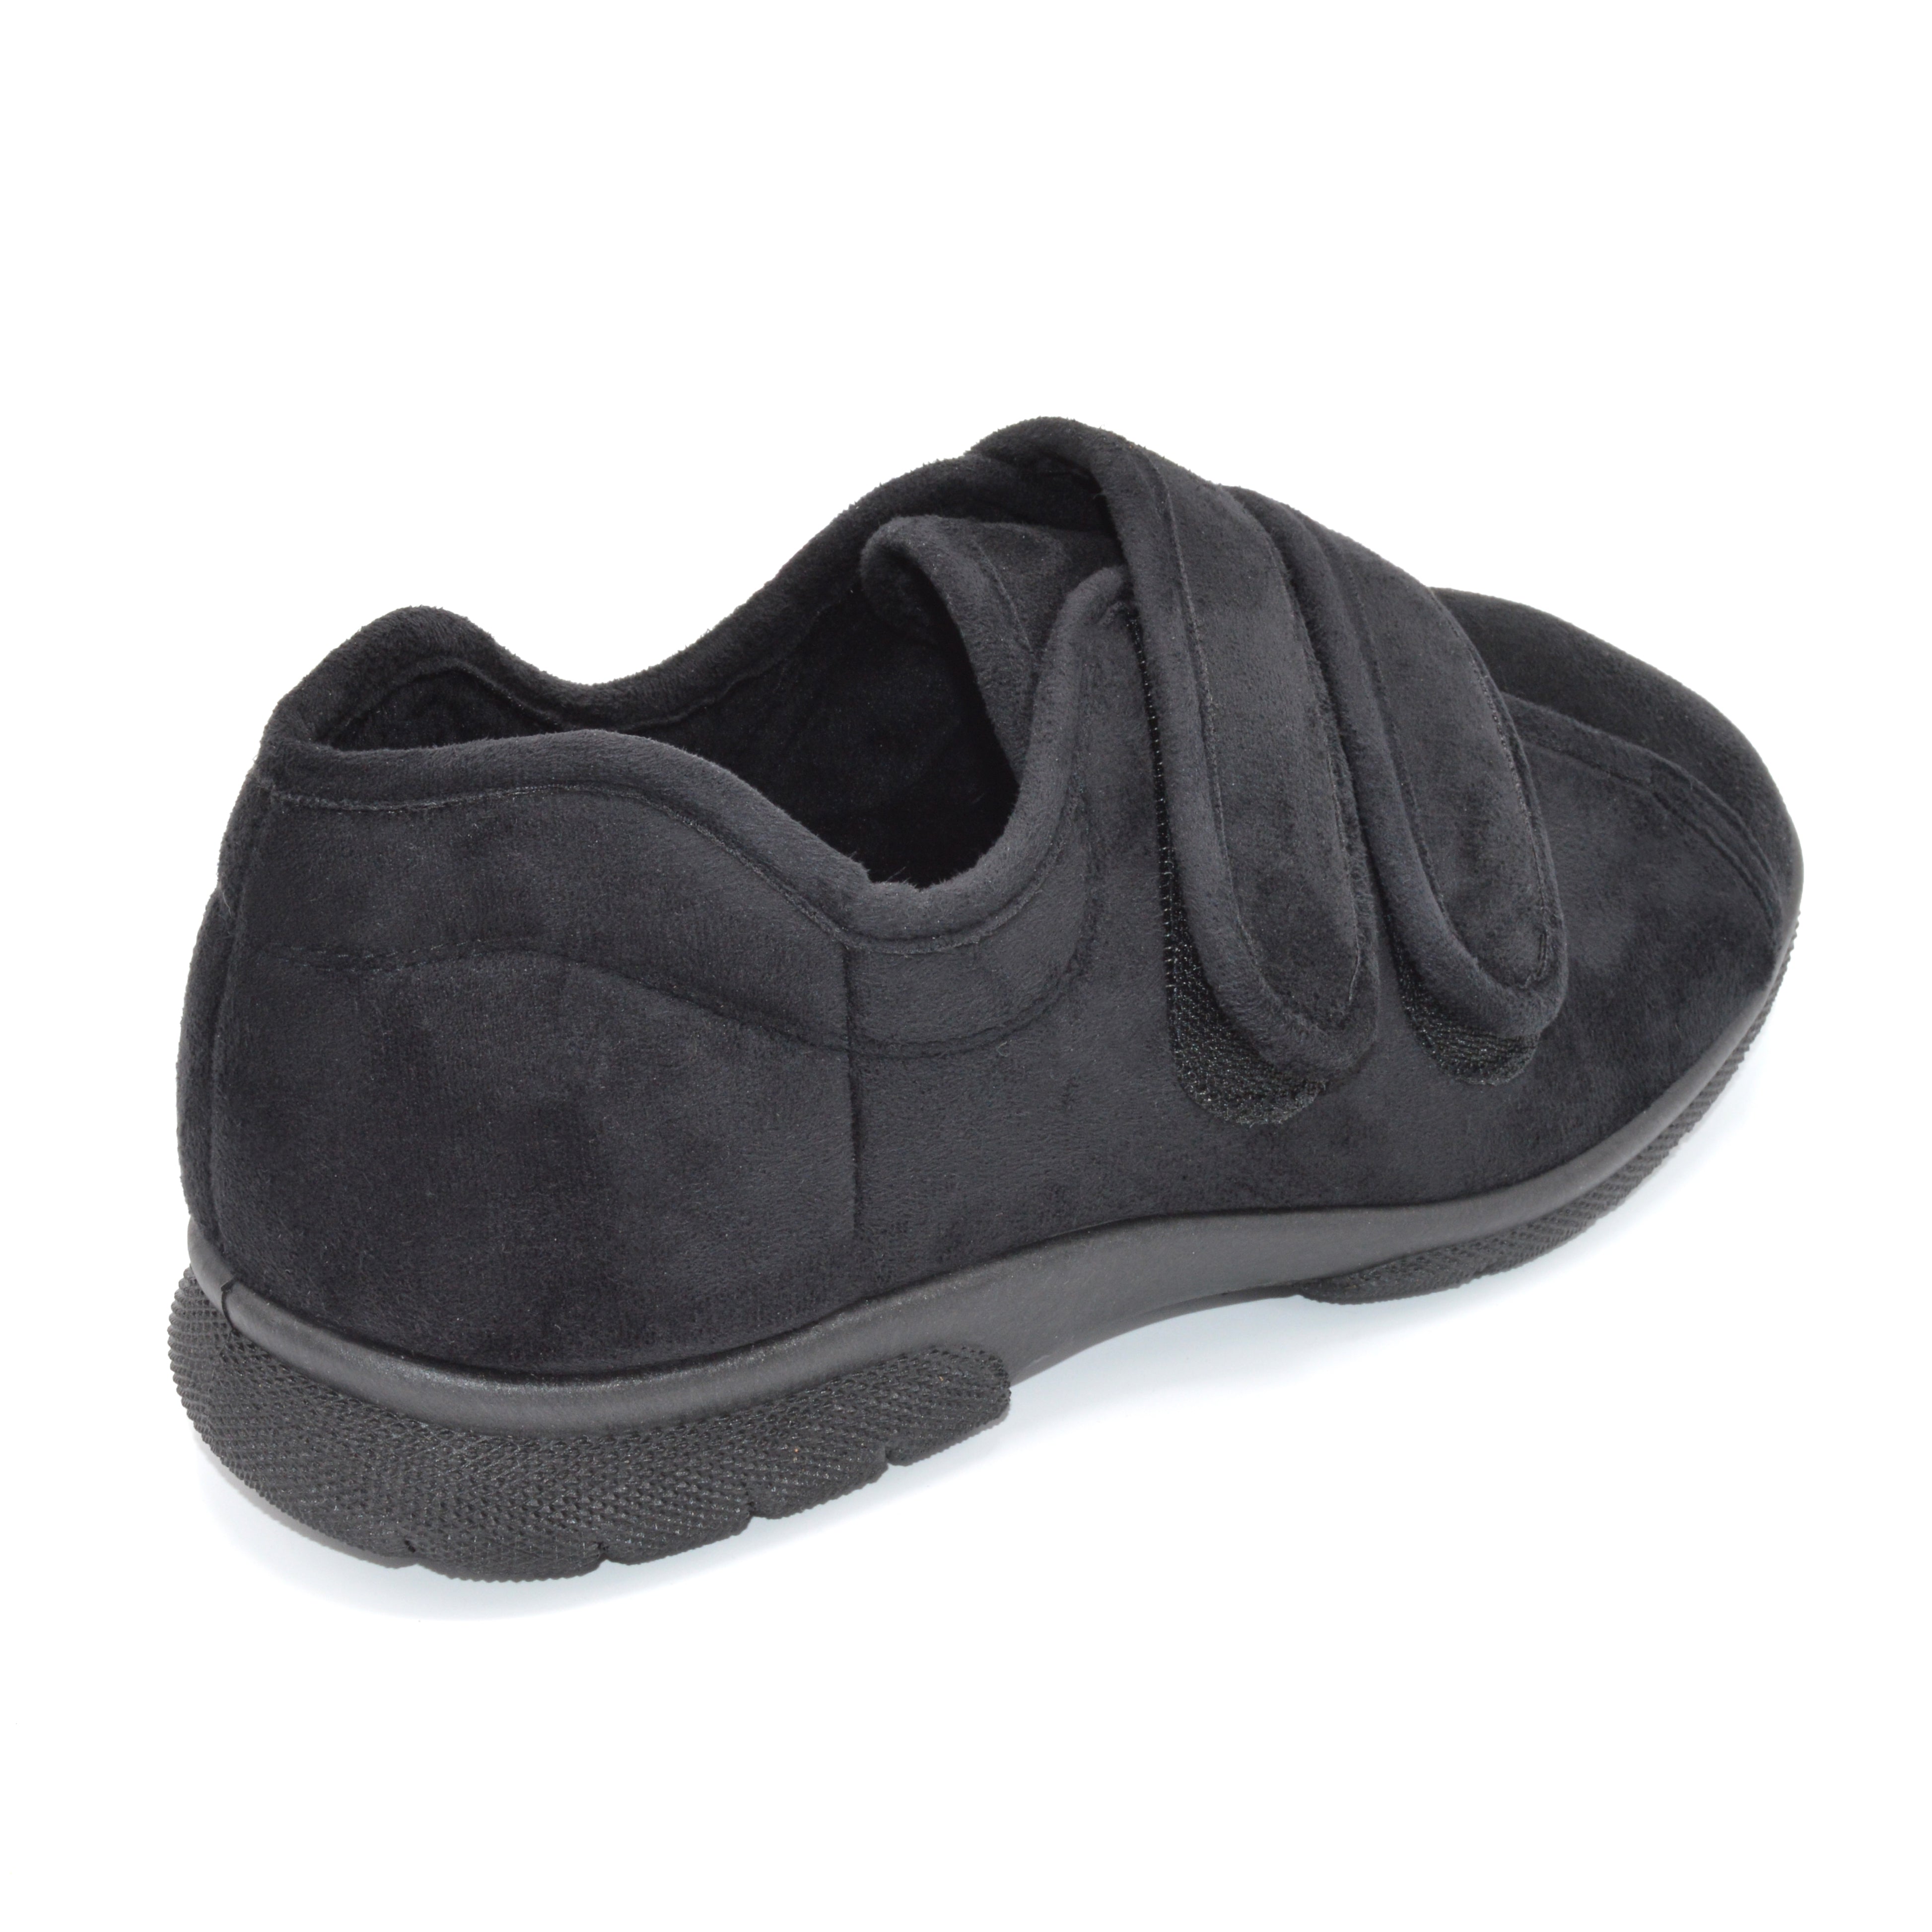 Extra Wide Slipper For Swollen Feet, Gout and Bunions — Wide Shoes